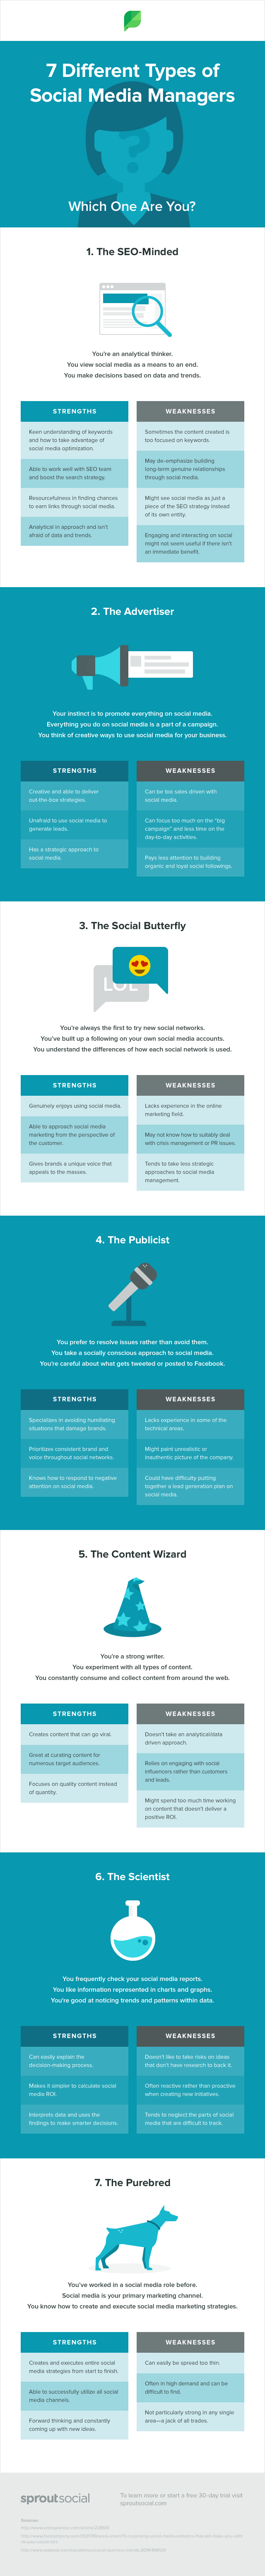 social media managers infographic